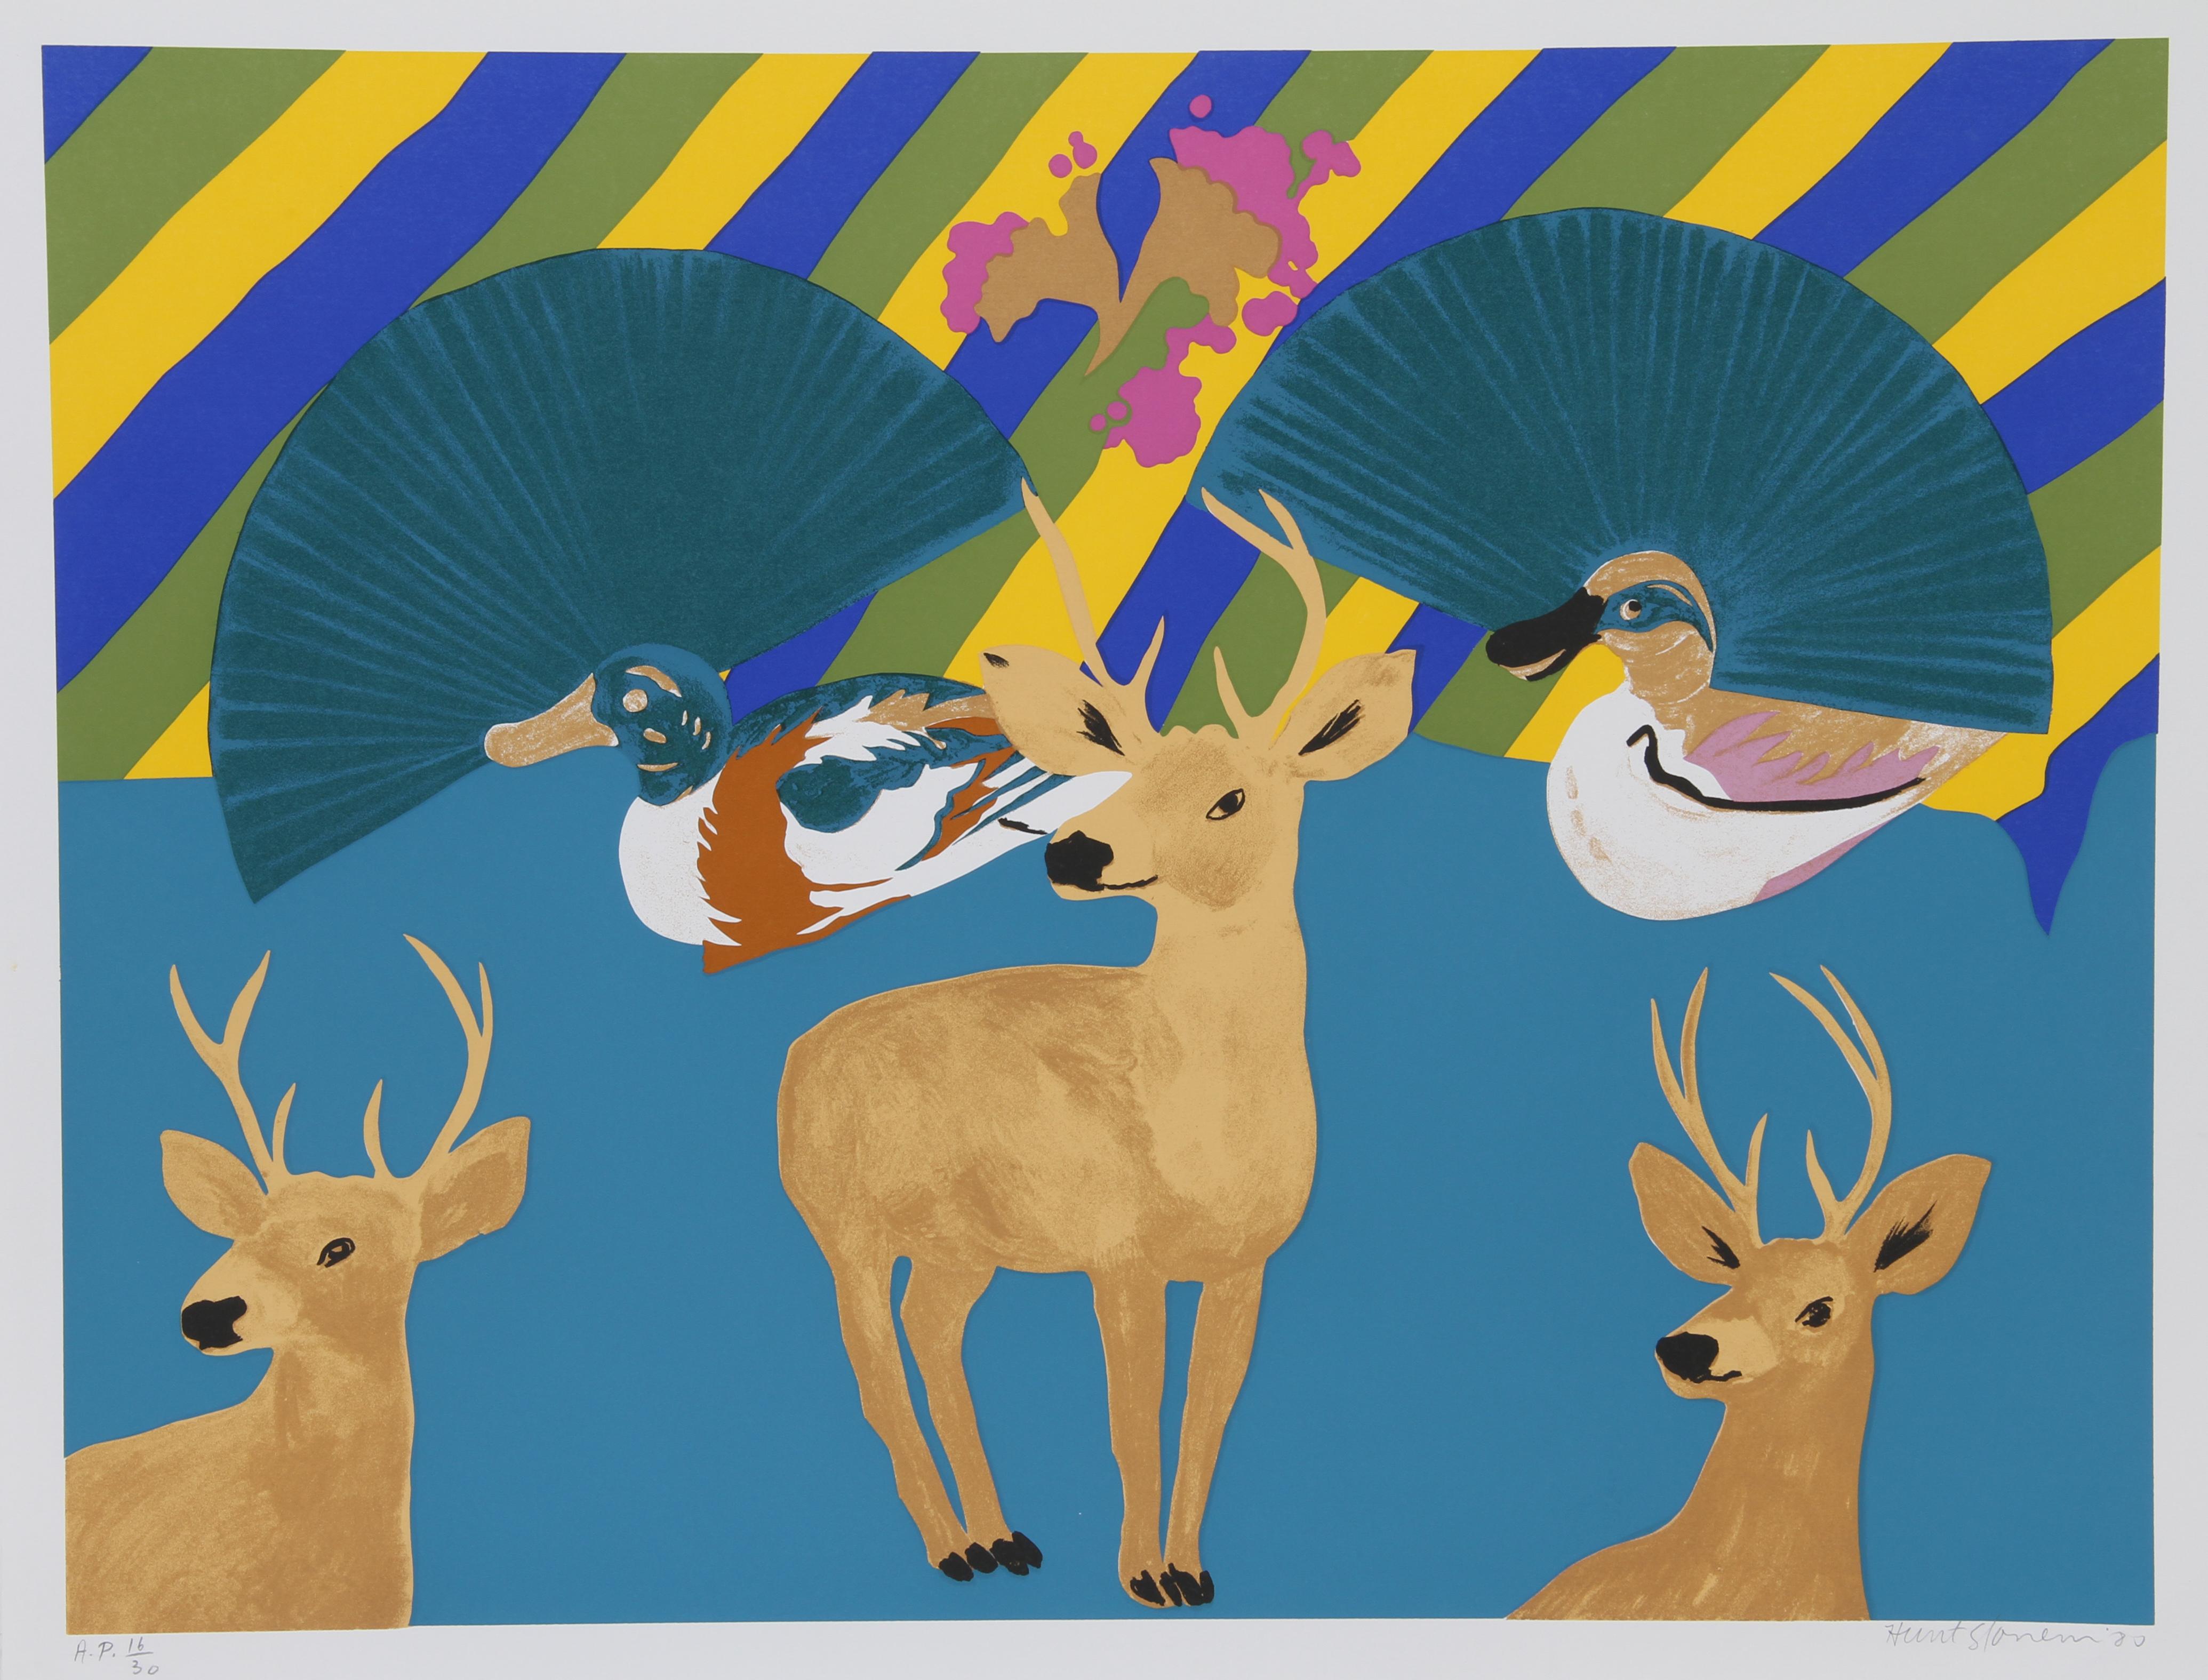 Artist:  Hunt Slonem, American (1951 - )
Title:  Three Deer
Year:  1980
Medium:  Screenprint, signed and numbered in pencil
Edition:  AP 30
Image Size:  24 x 32 inches
Size:  26 in. x 34 in. (66.04 cm x 86.36 cm)